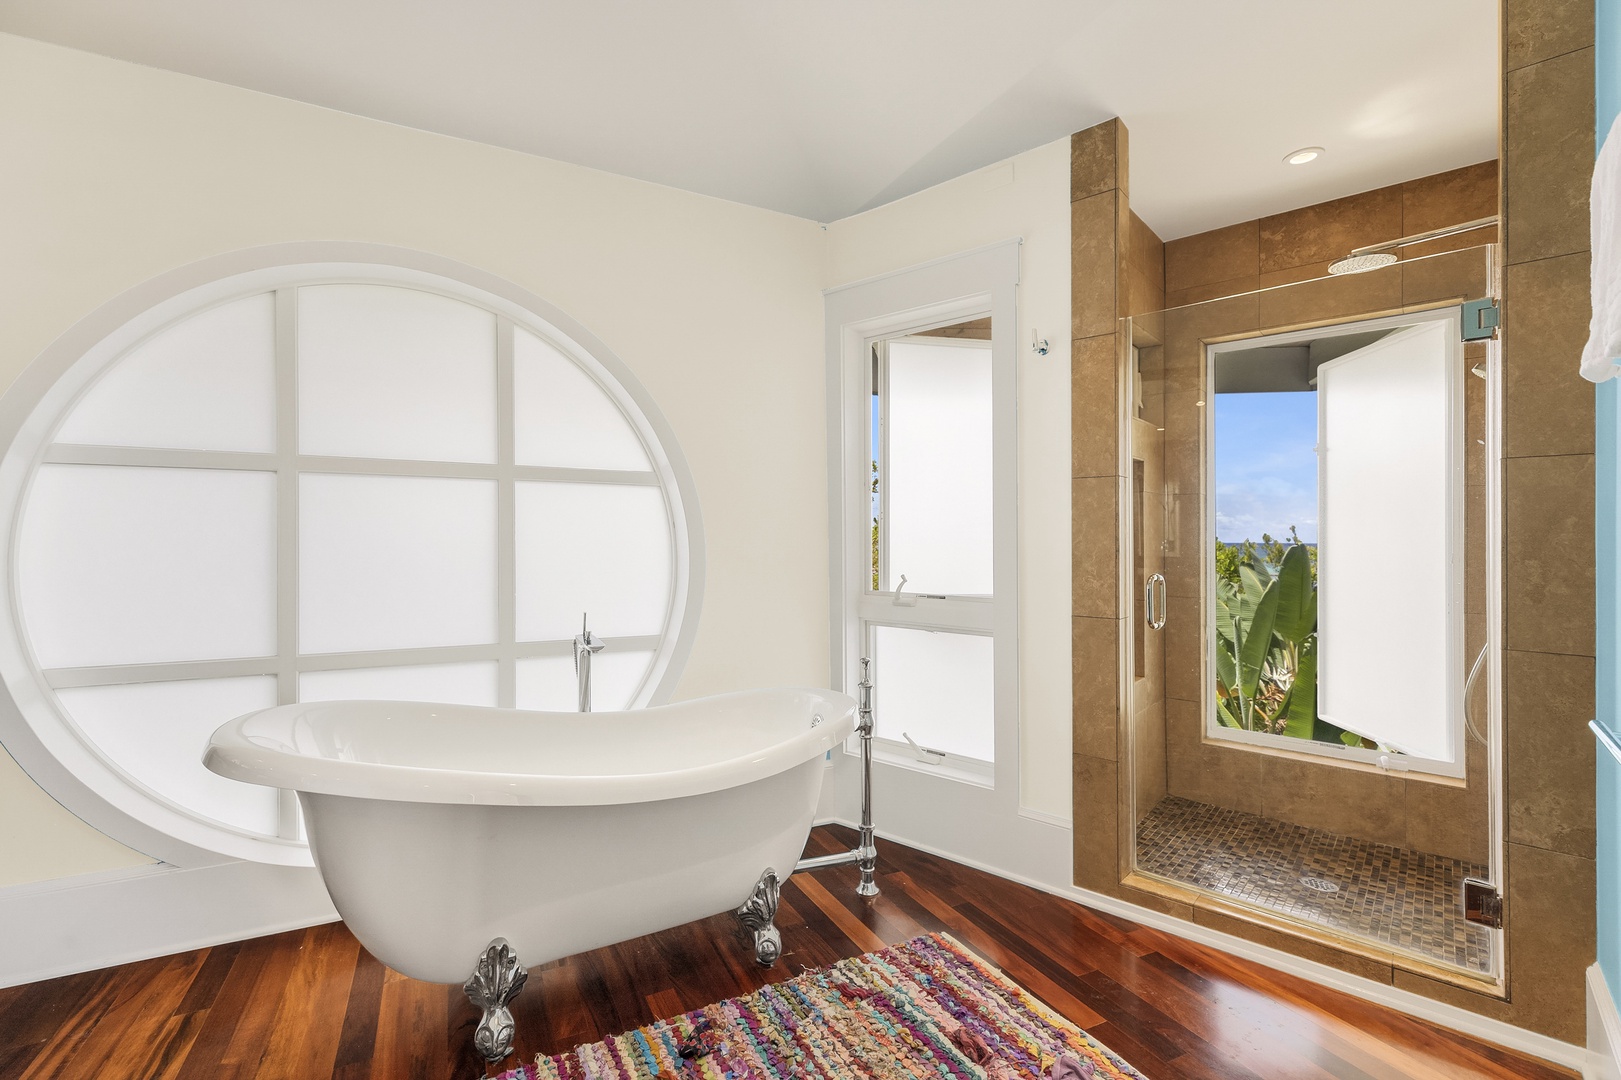 Kailua Vacation Rentals, Lanikai Villa - Plus, step into the walk-in shower with killer views of the lush, tropical greenery that surrounds